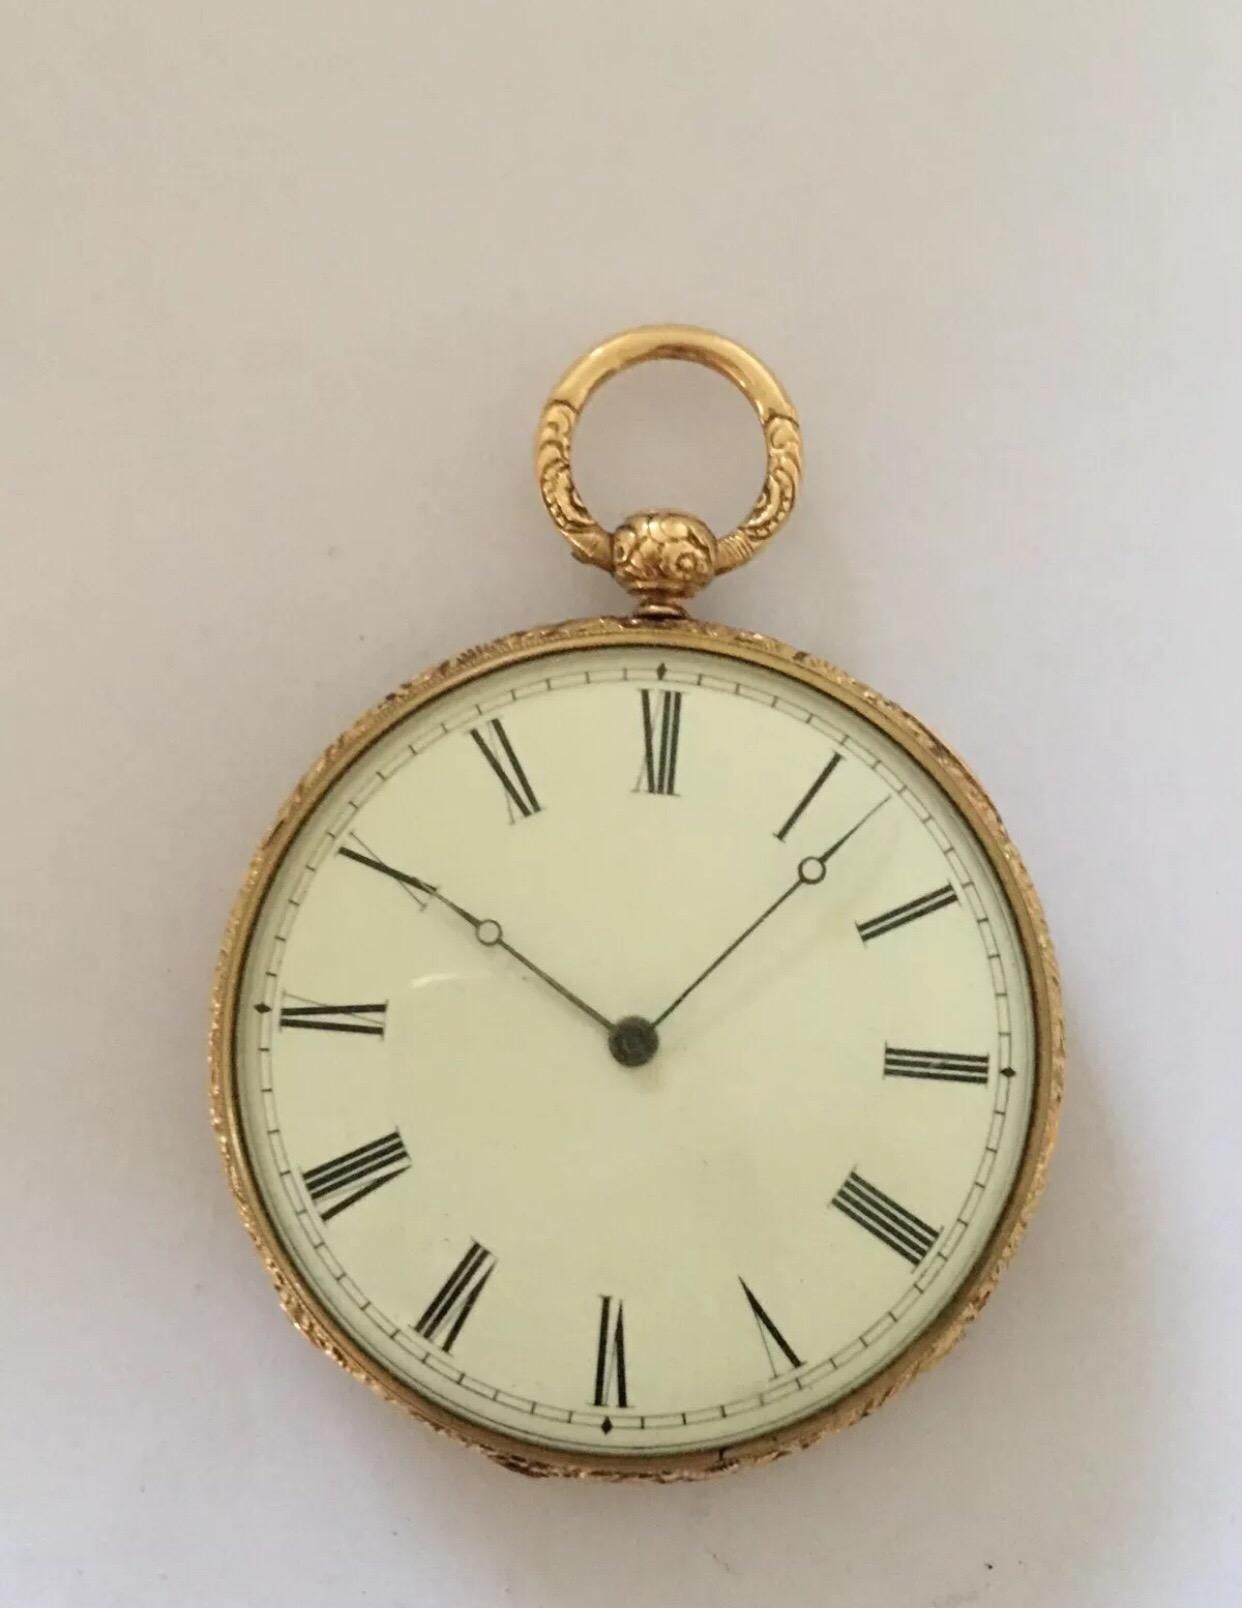 Antique Gold Plated Key-wind Pocket Watch.


This very fine quality watch is in good working order and immaculate condition.